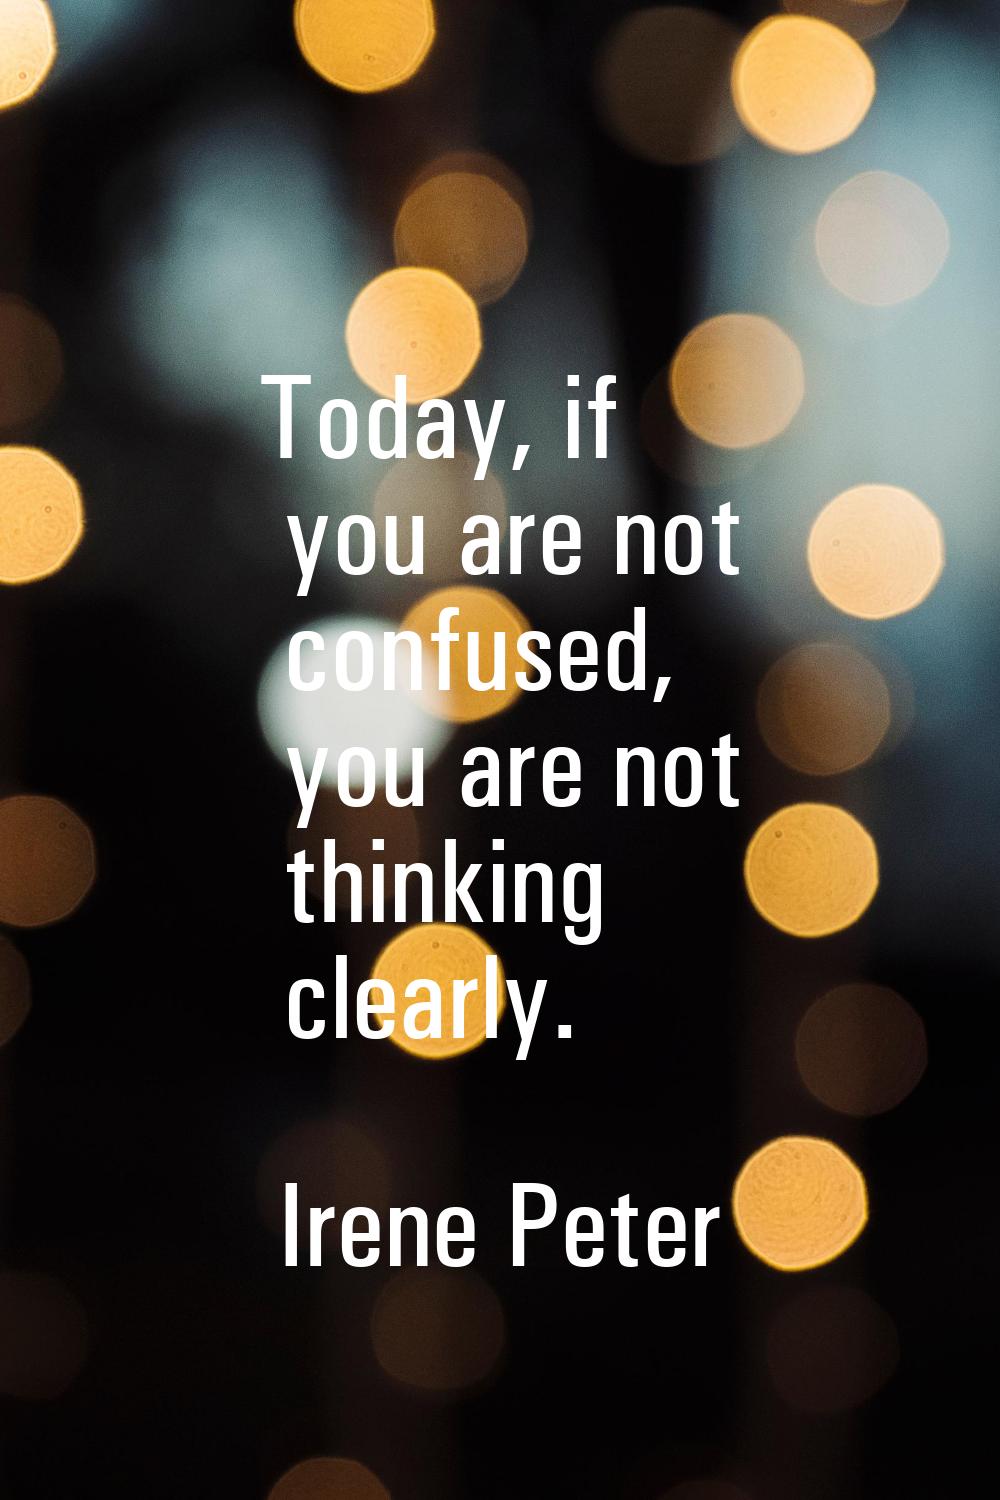 Today, if you are not confused, you are not thinking clearly.